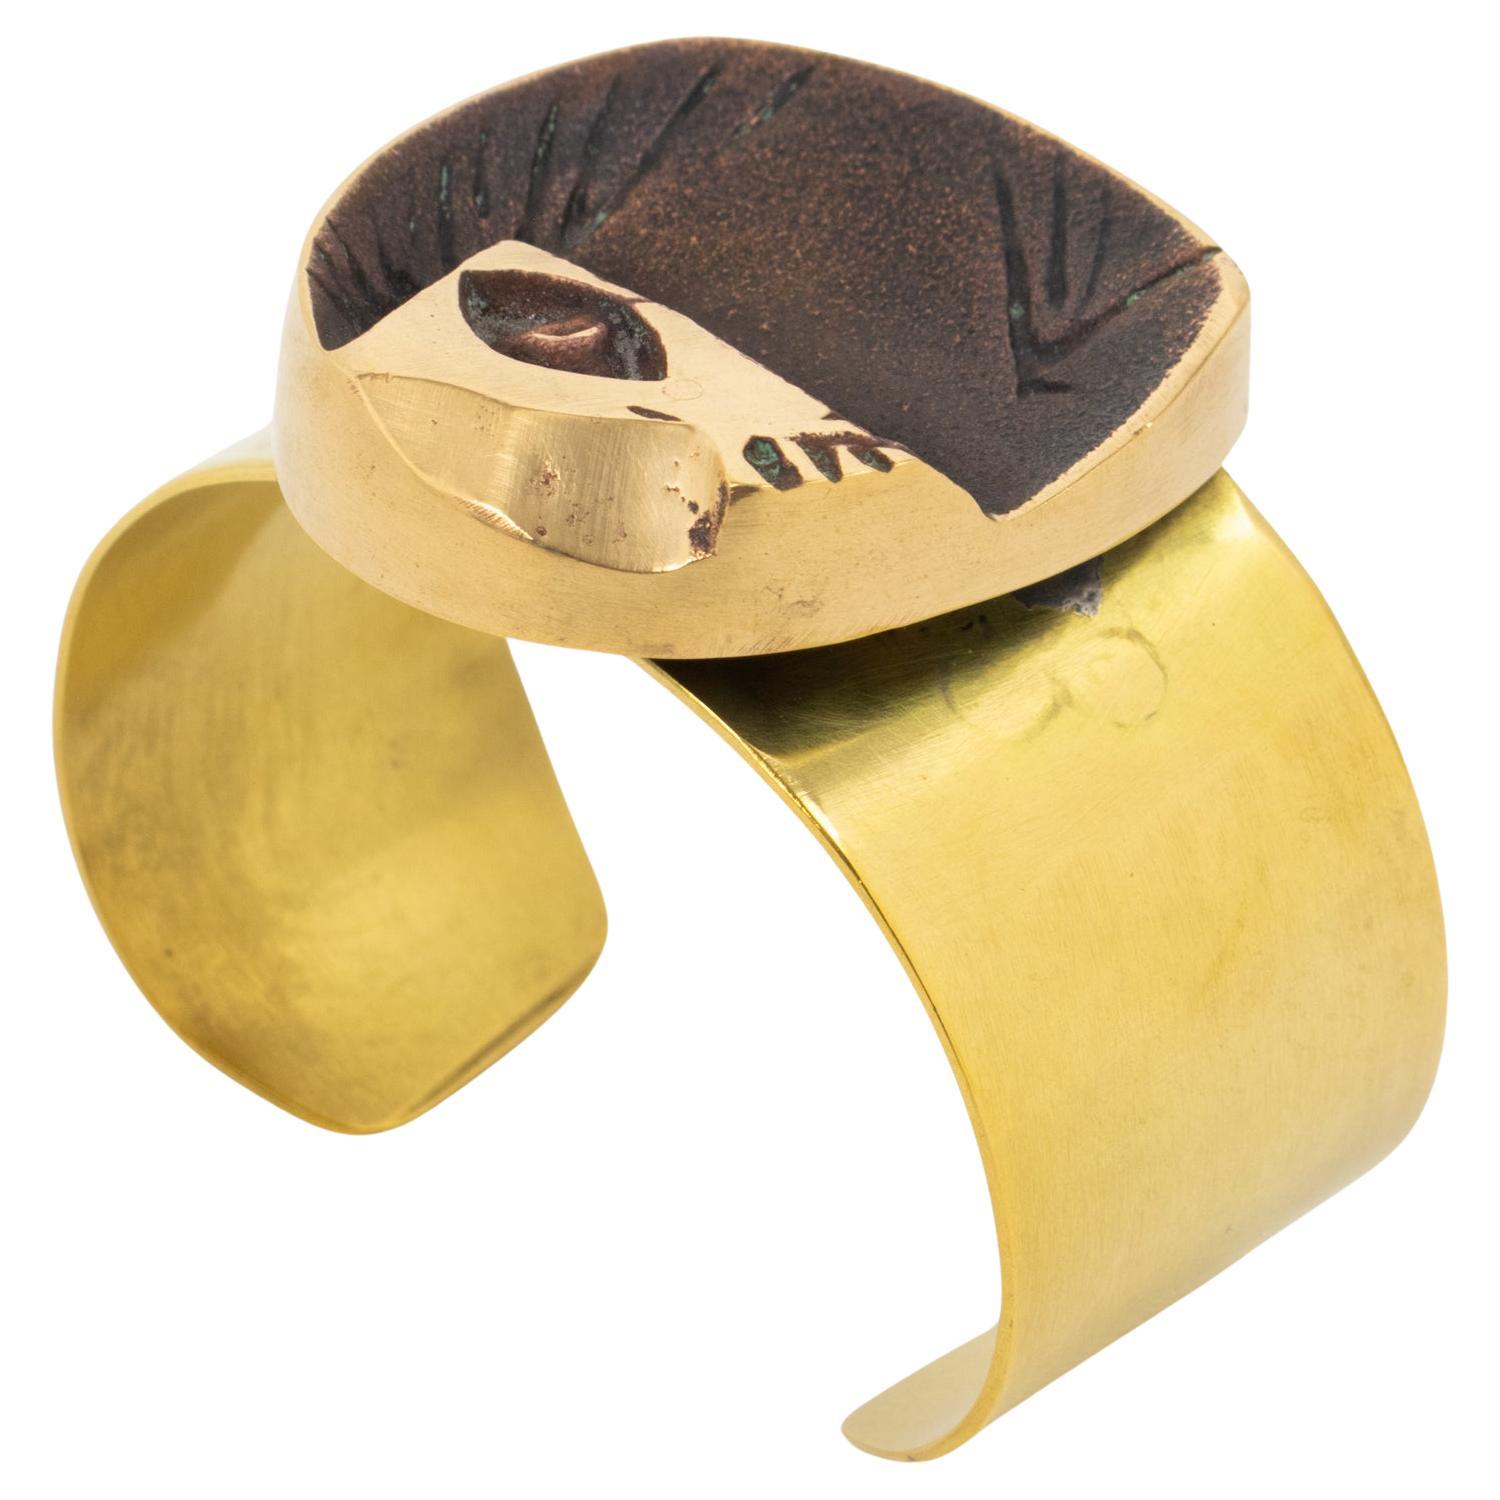 French sculptor and painter Henri Nogaret (1927 -) created this sculptural brutalist bronze and brass cuff bracelet in the 1960s. The large brass band is topped with a gilded bronze modernist abstract sculpture ornament. The engraved signature is on